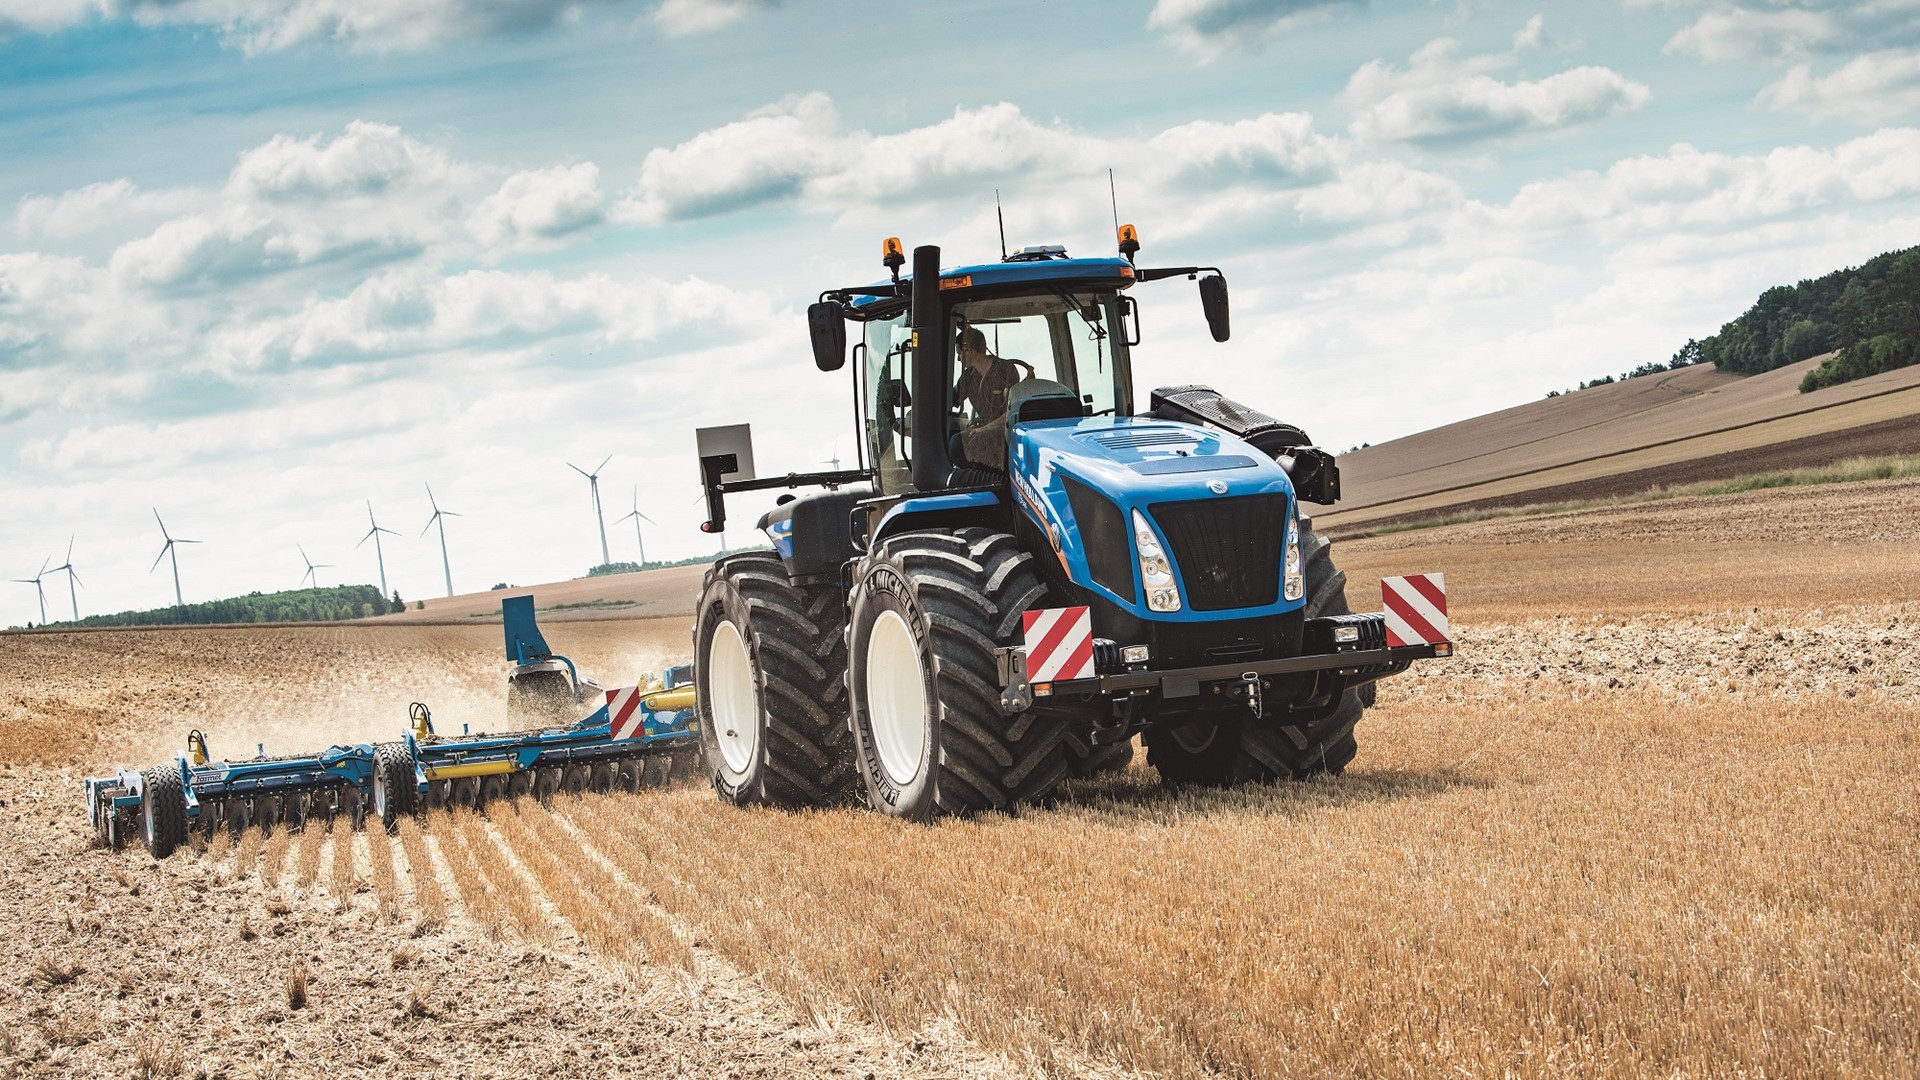 New Holland introduces T9 Auto CommandTM with the largest horsepower offering on the market